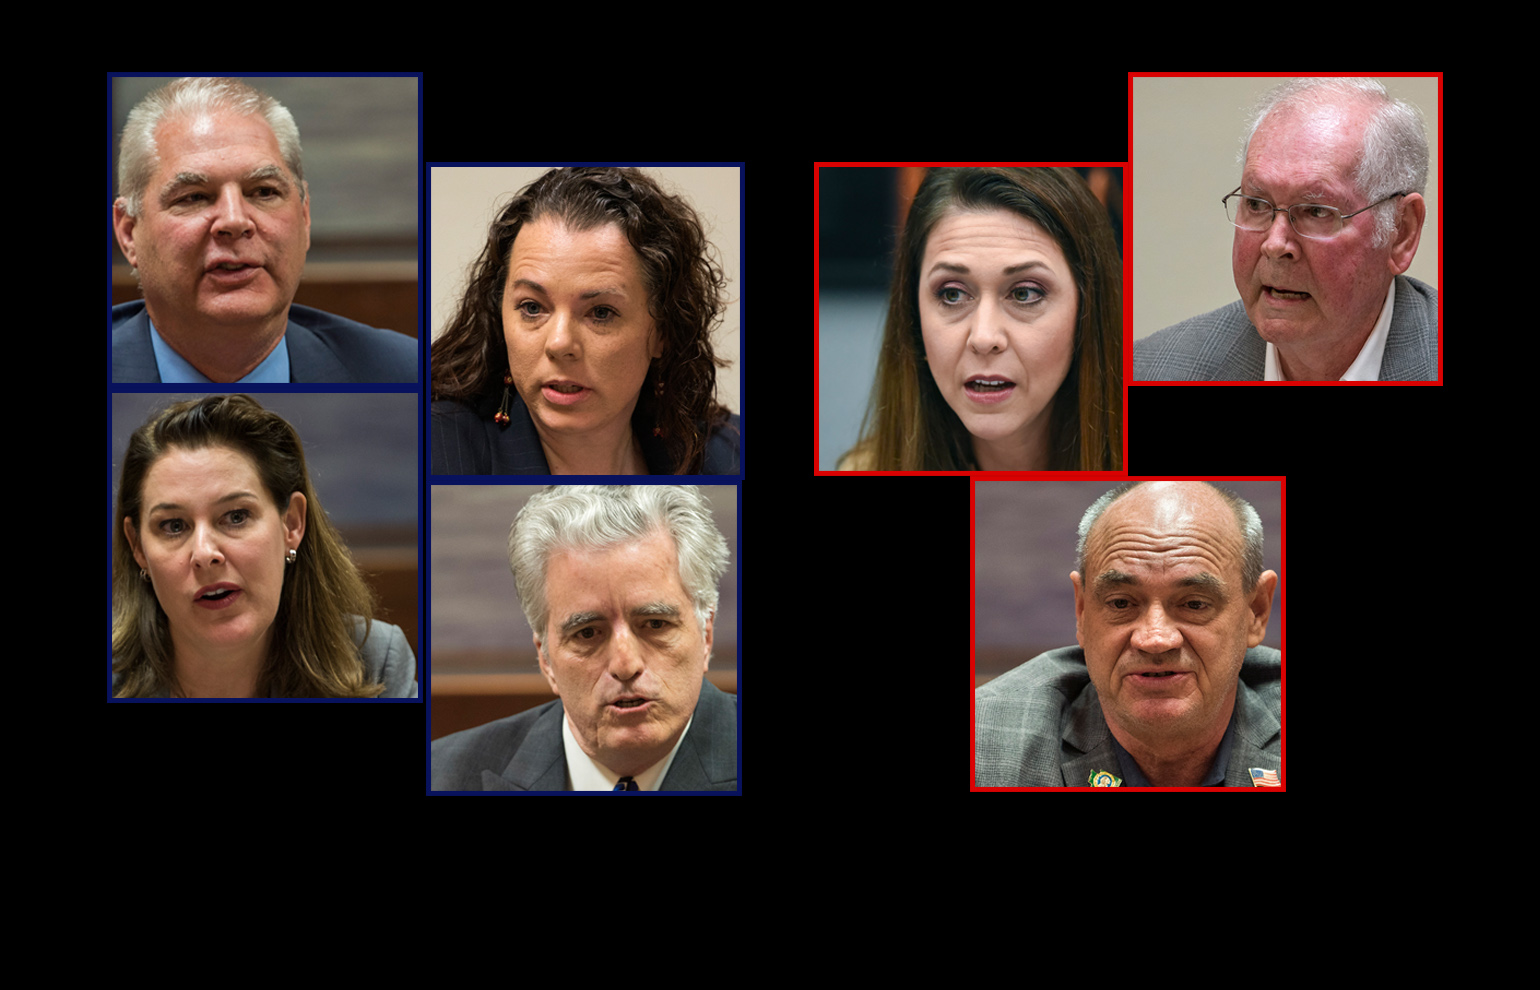 Candidates for the 3rd District congressional seat, clockwise from top left, Martin hash, Dorothy Gasque, incumbent Rep. Jaime Herrera Beutler, Earl Bowerman. Michael Cortney, David McDeavitt and Carolyn Long.